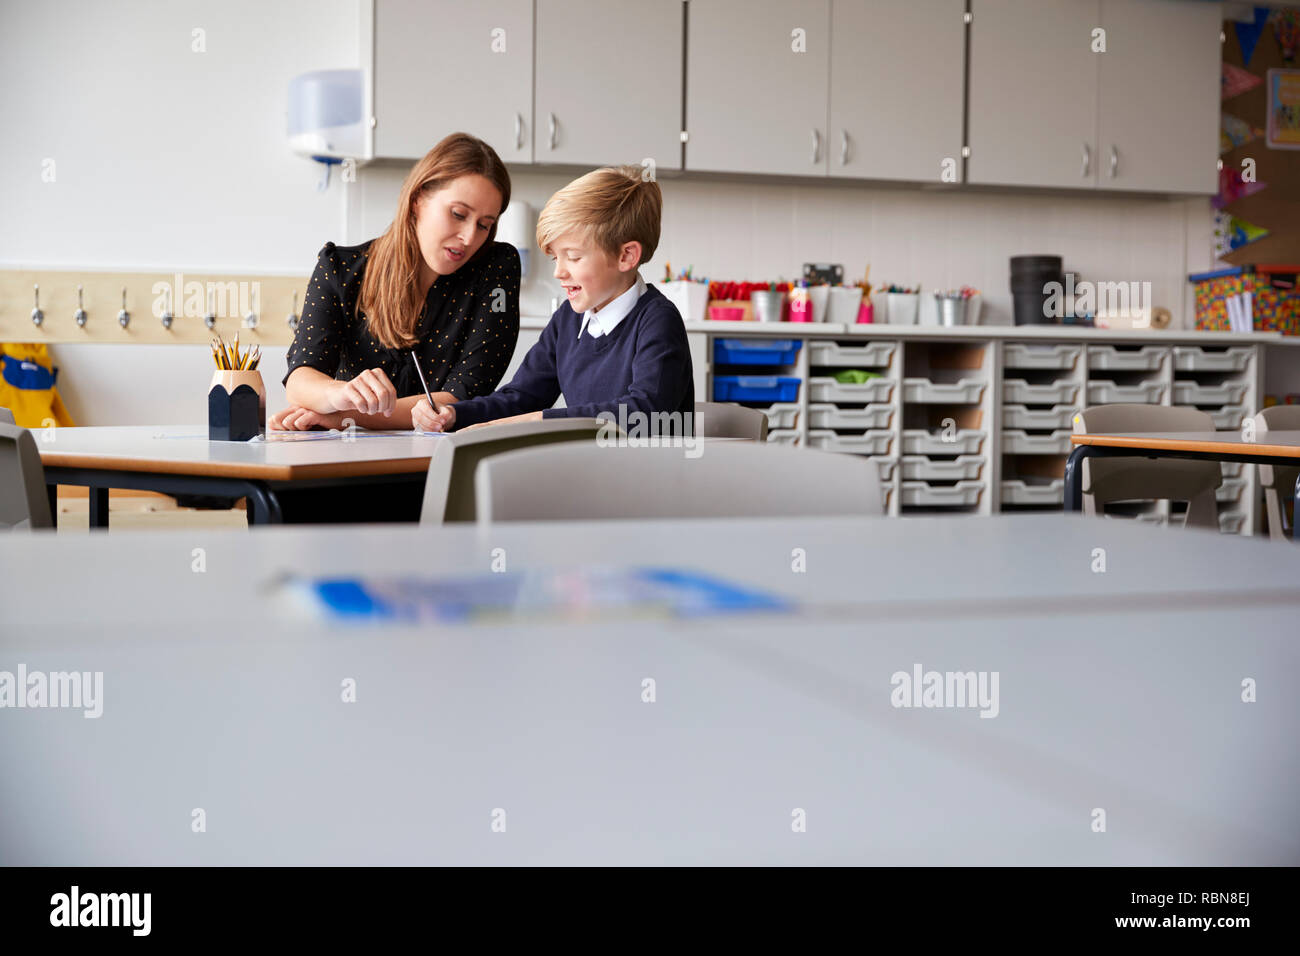 Young female primary school teacher and schoolboy sitting at a table working one on one, selective focus Stock Photo